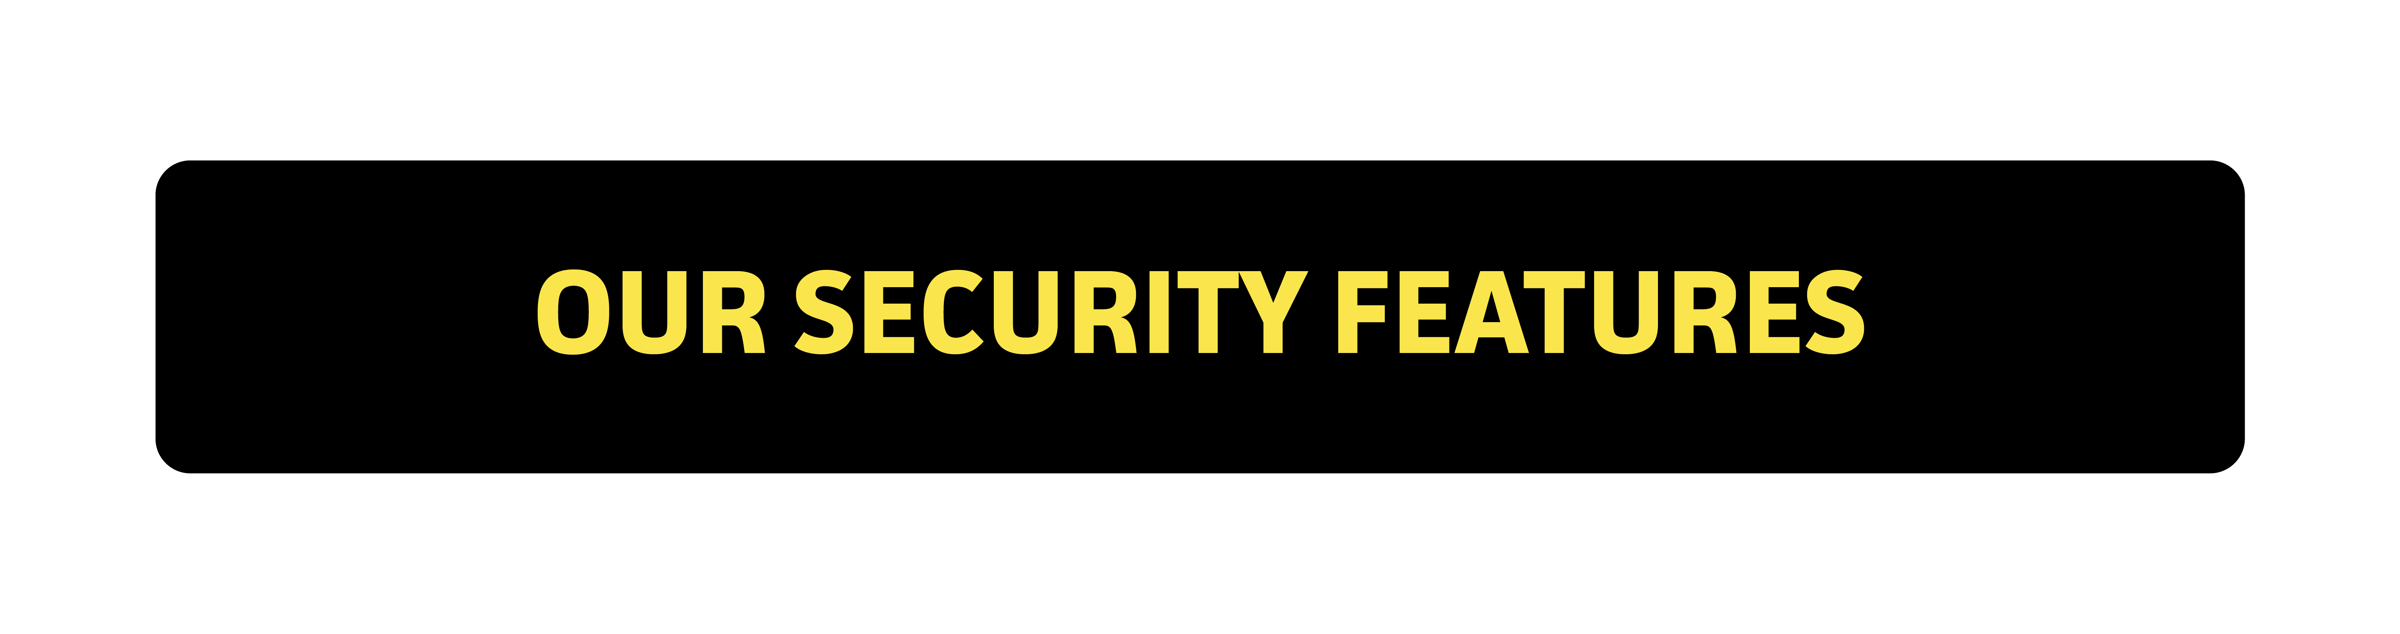 Our Security Features